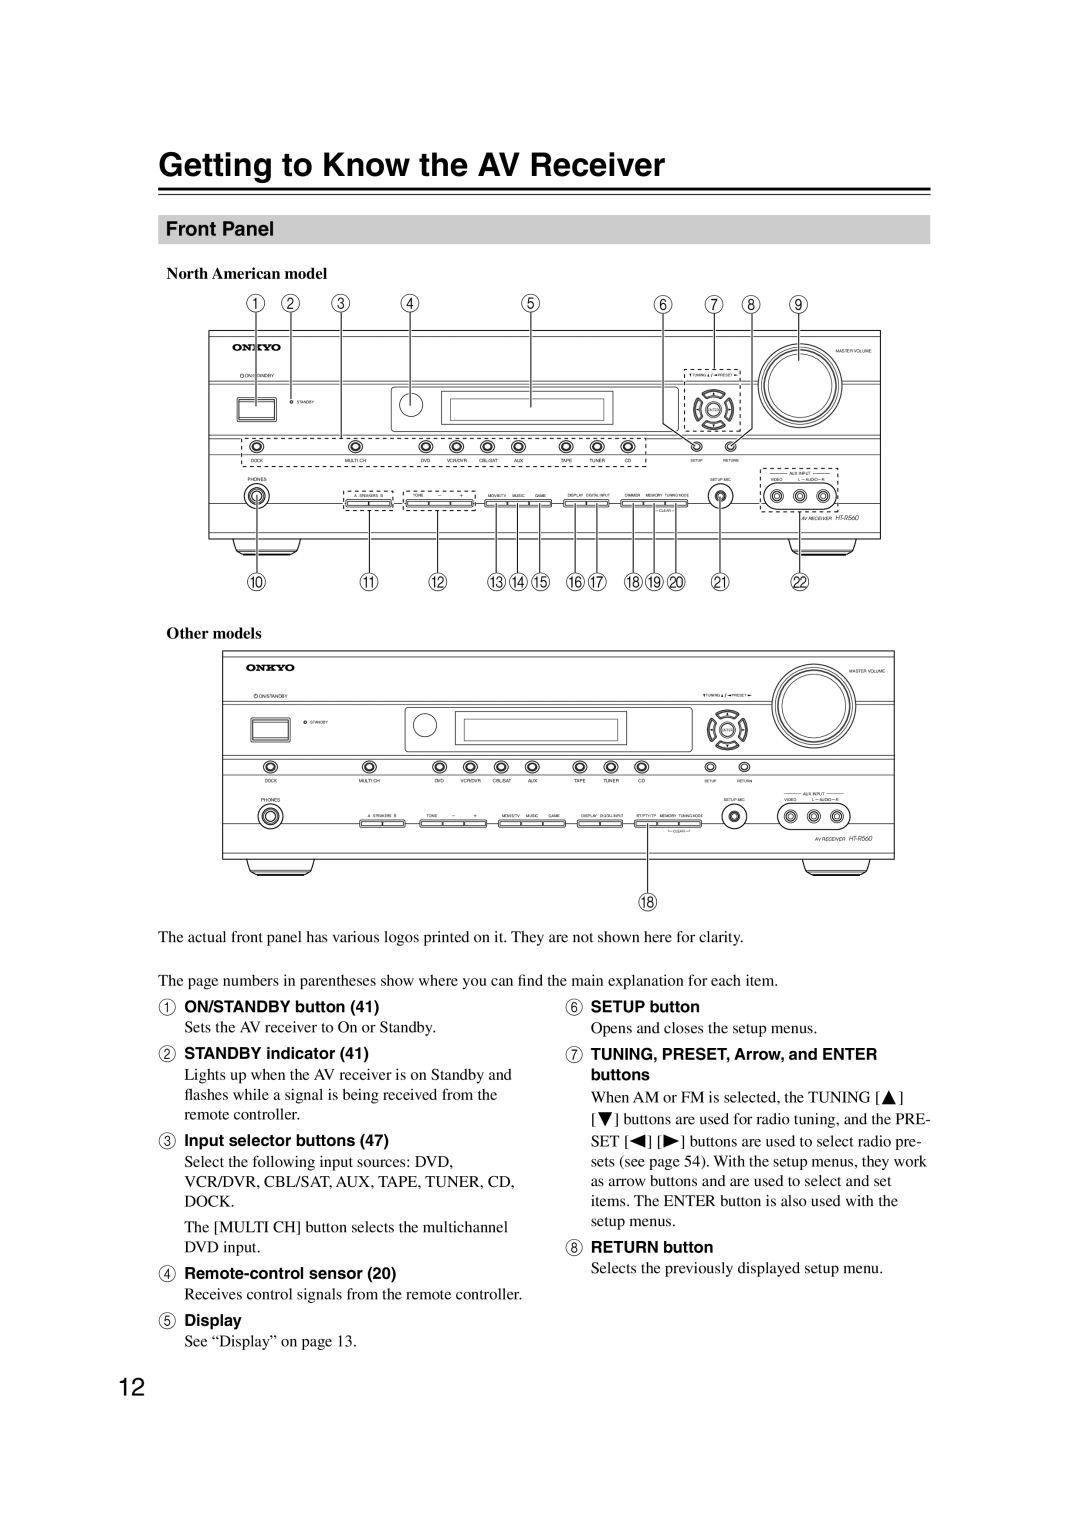 Onkyo HT-S5100 instruction manual Getting to Know the AV Receiver, Front Panel 